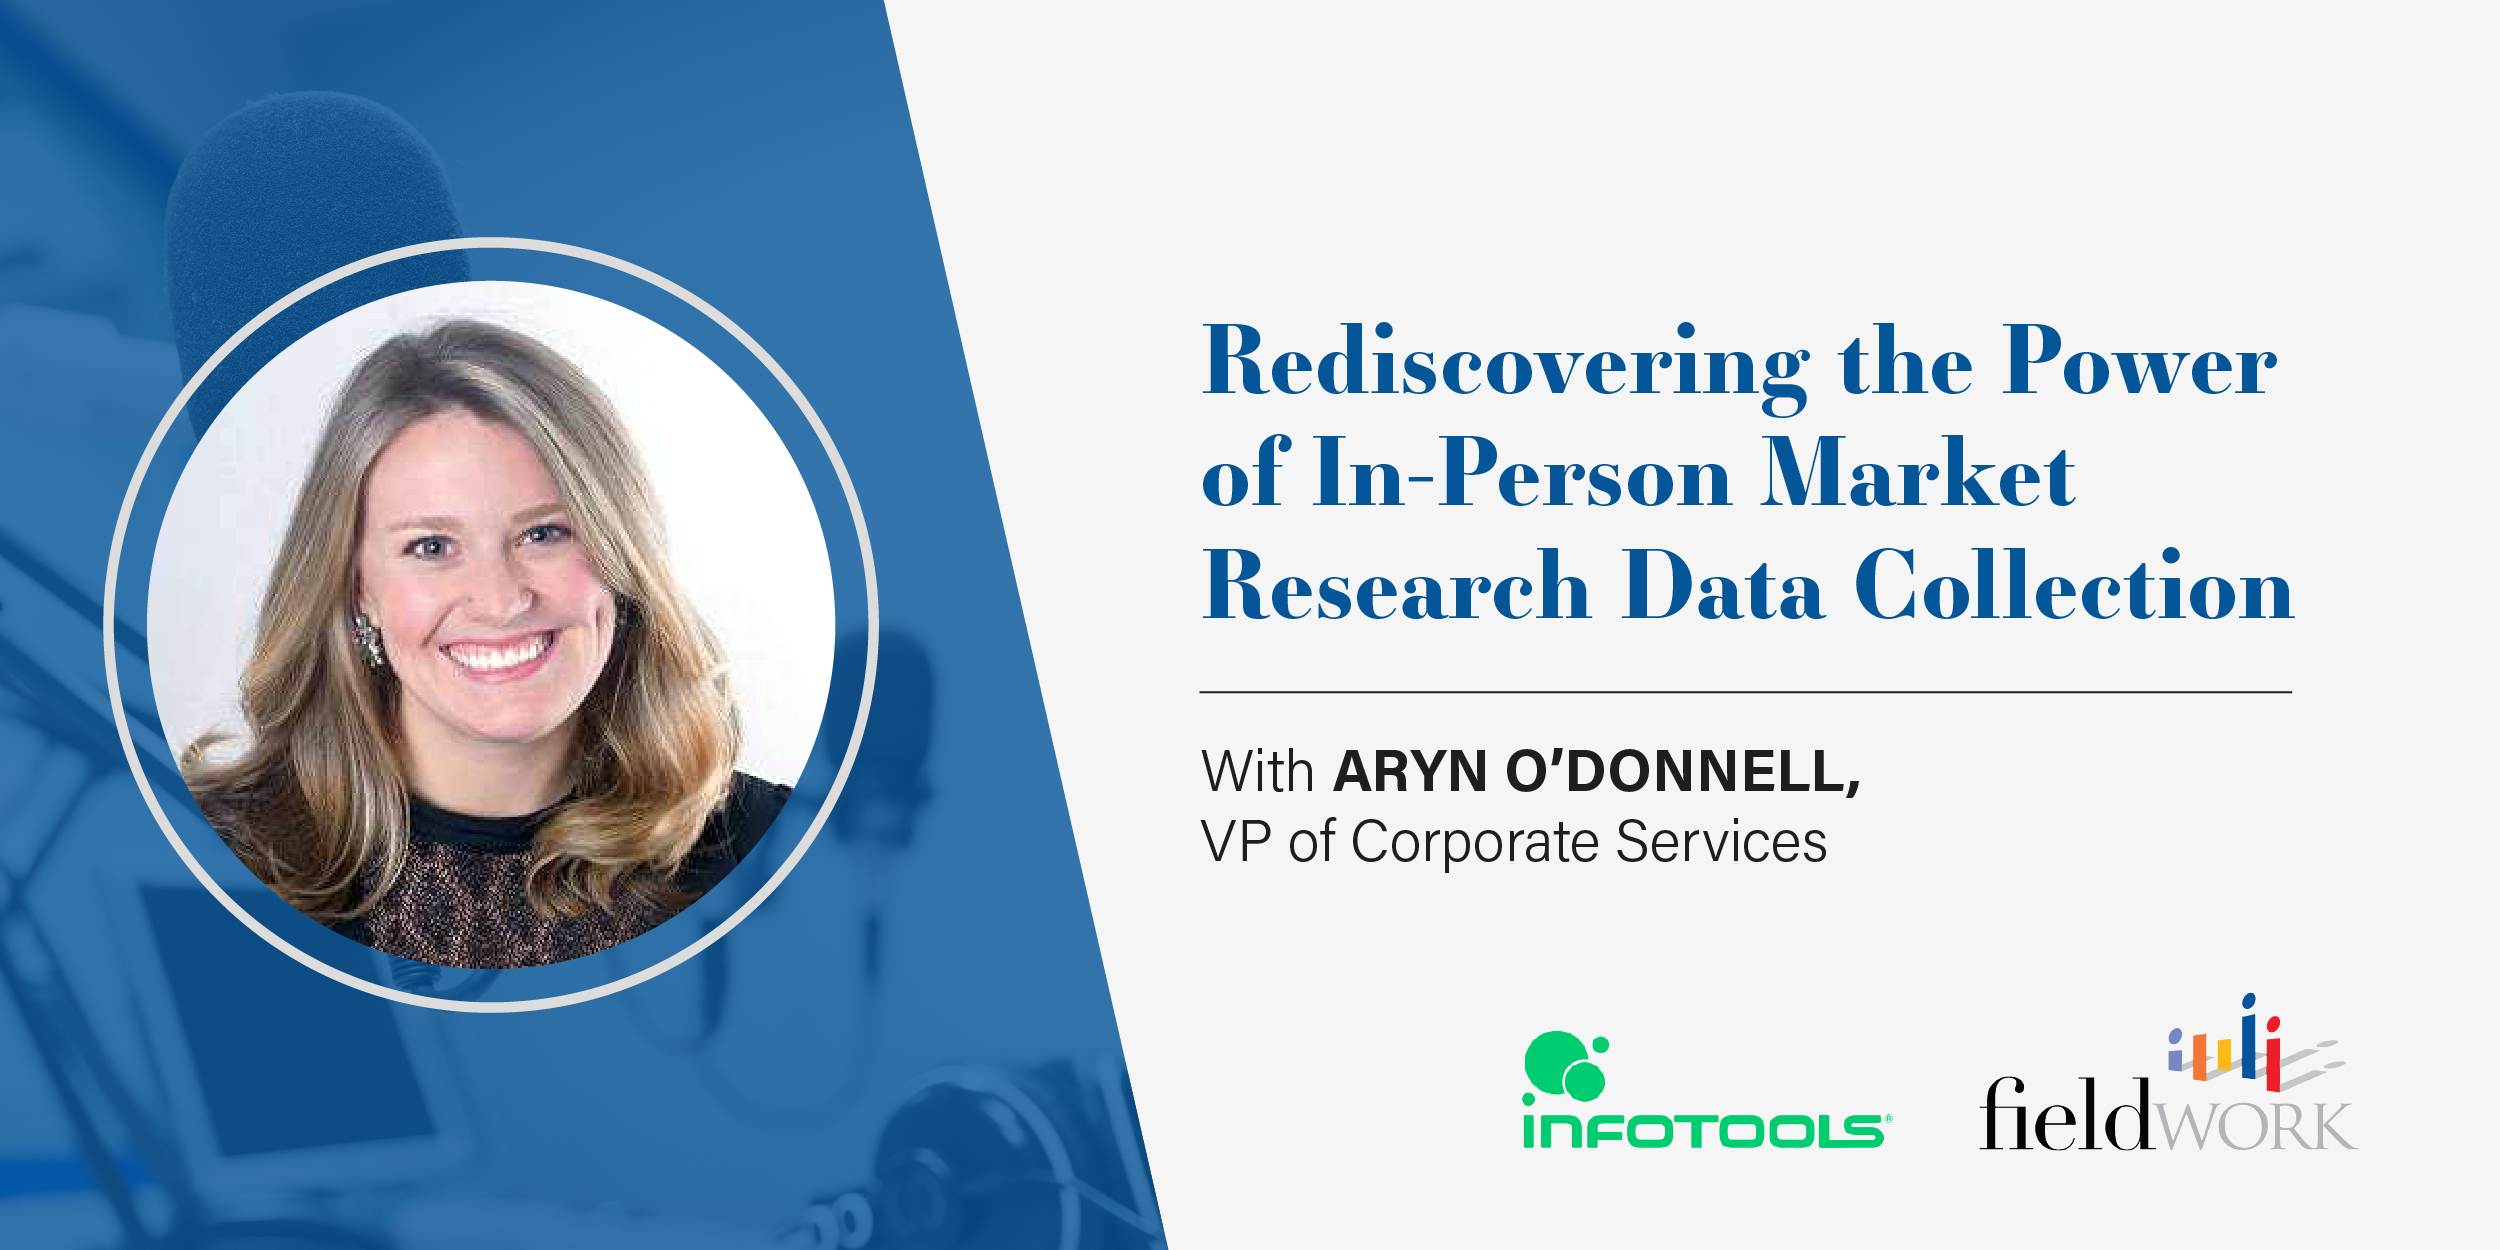 The Power of In-Person Research with Aryn O'Donnell